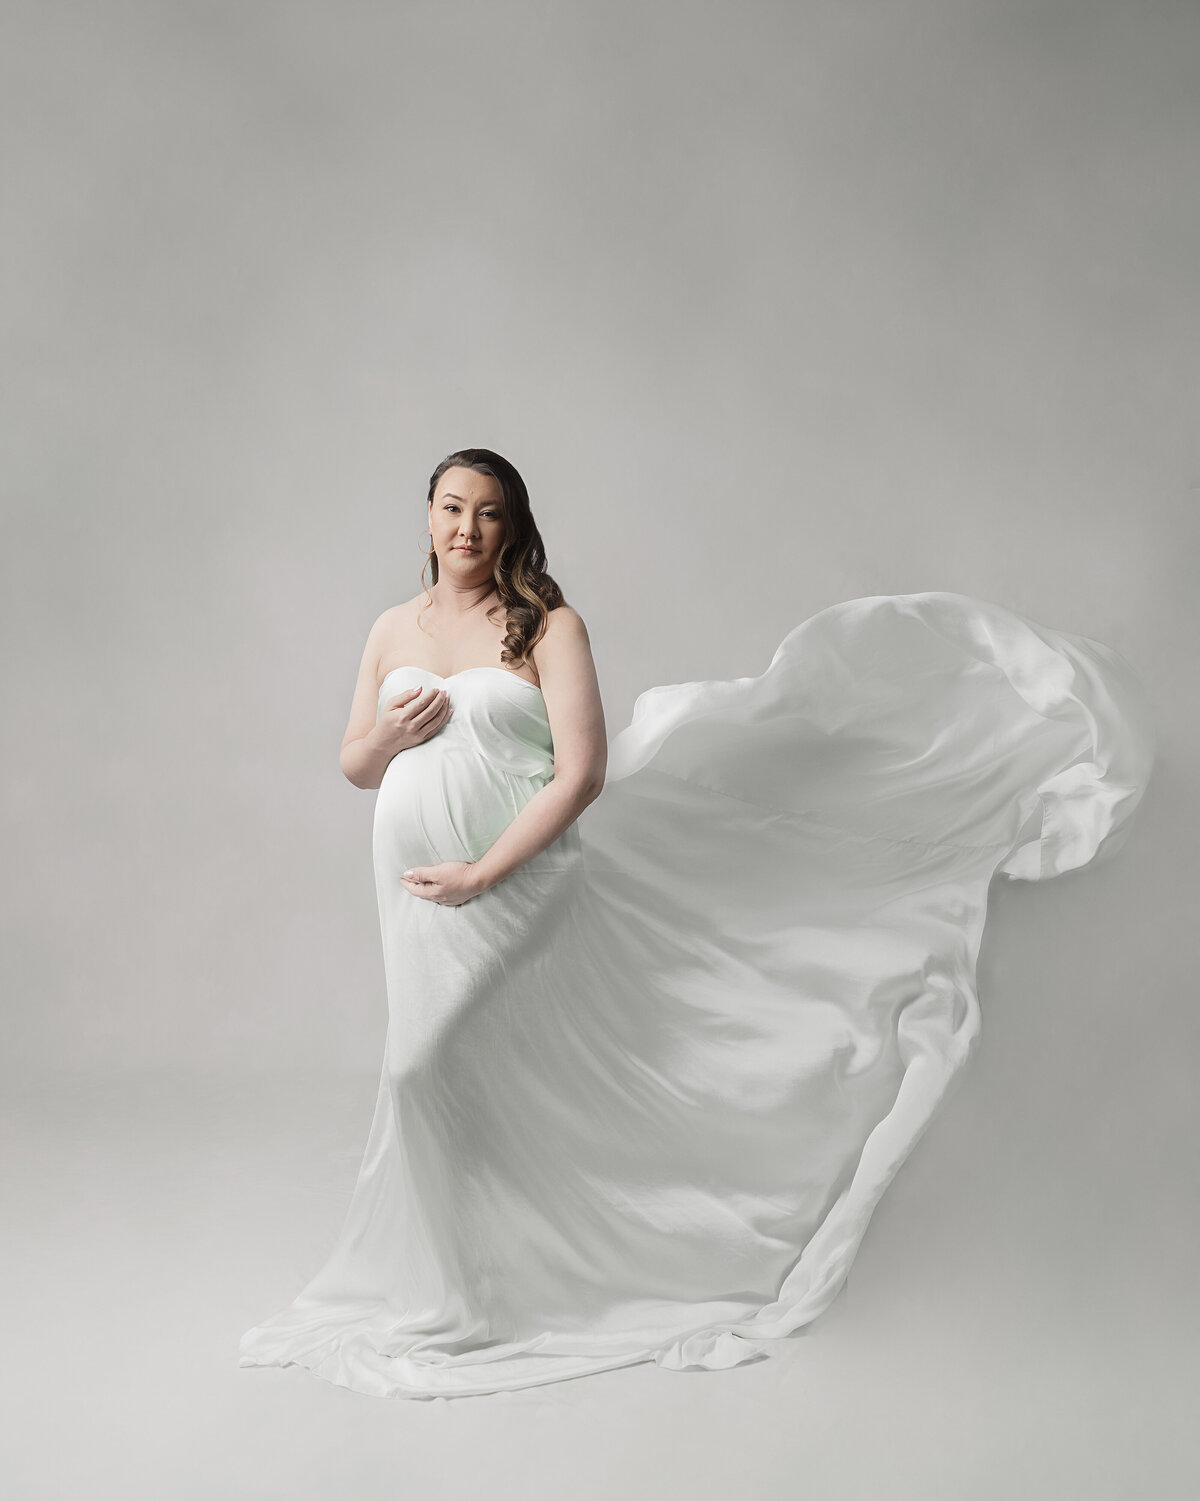 Mother pregnant with twin wearing white dress on white backdrop